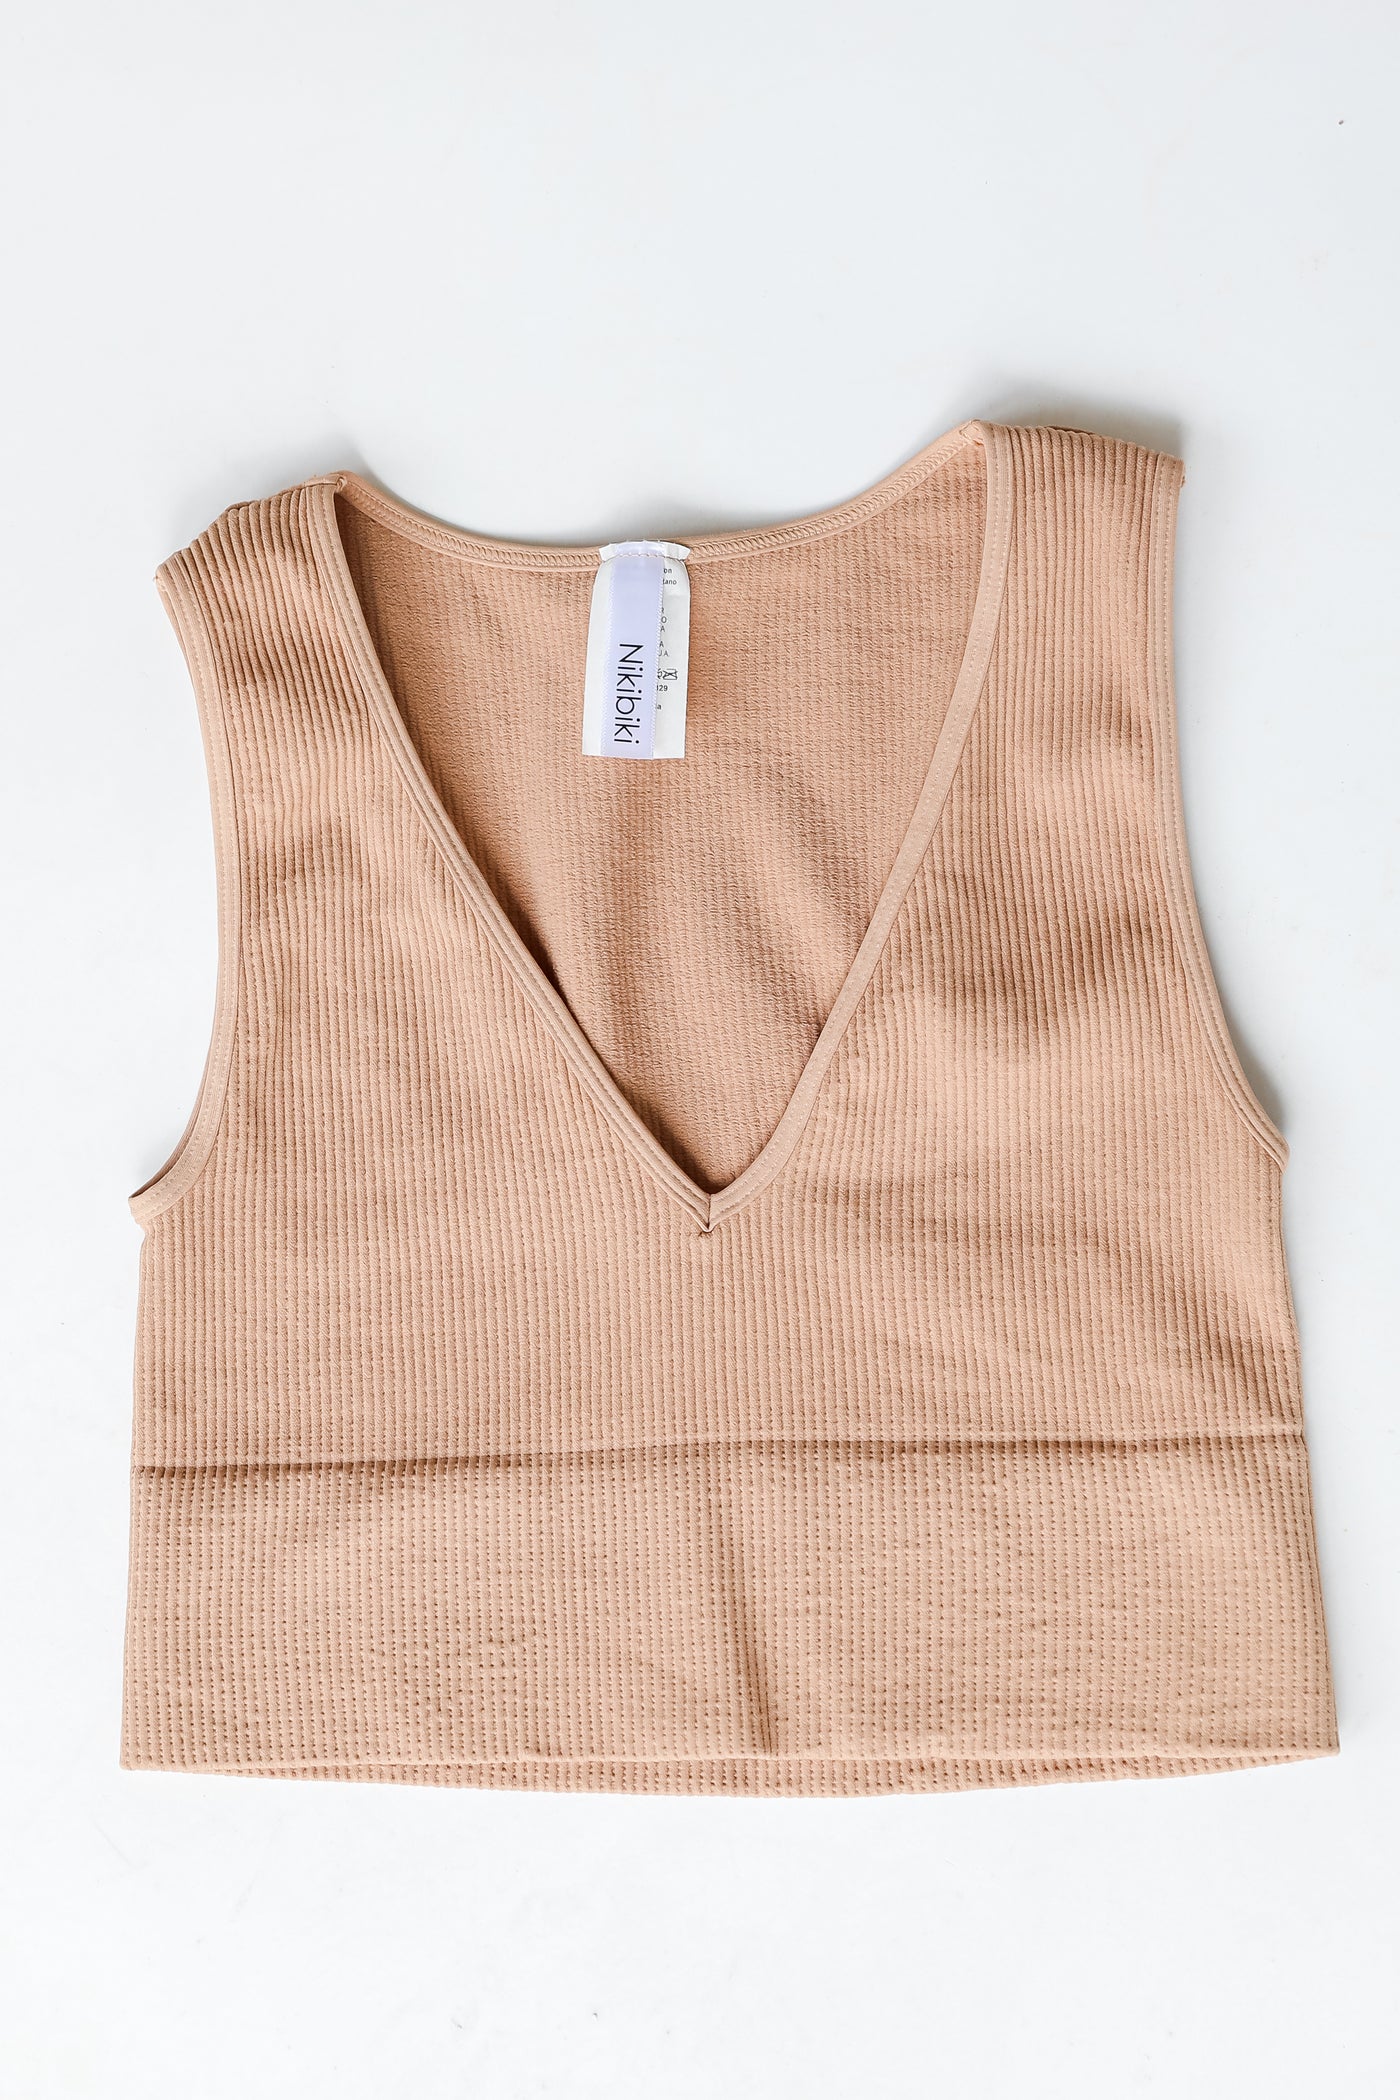 V-Neck Ribbed Cropped Tank in nude flat lay